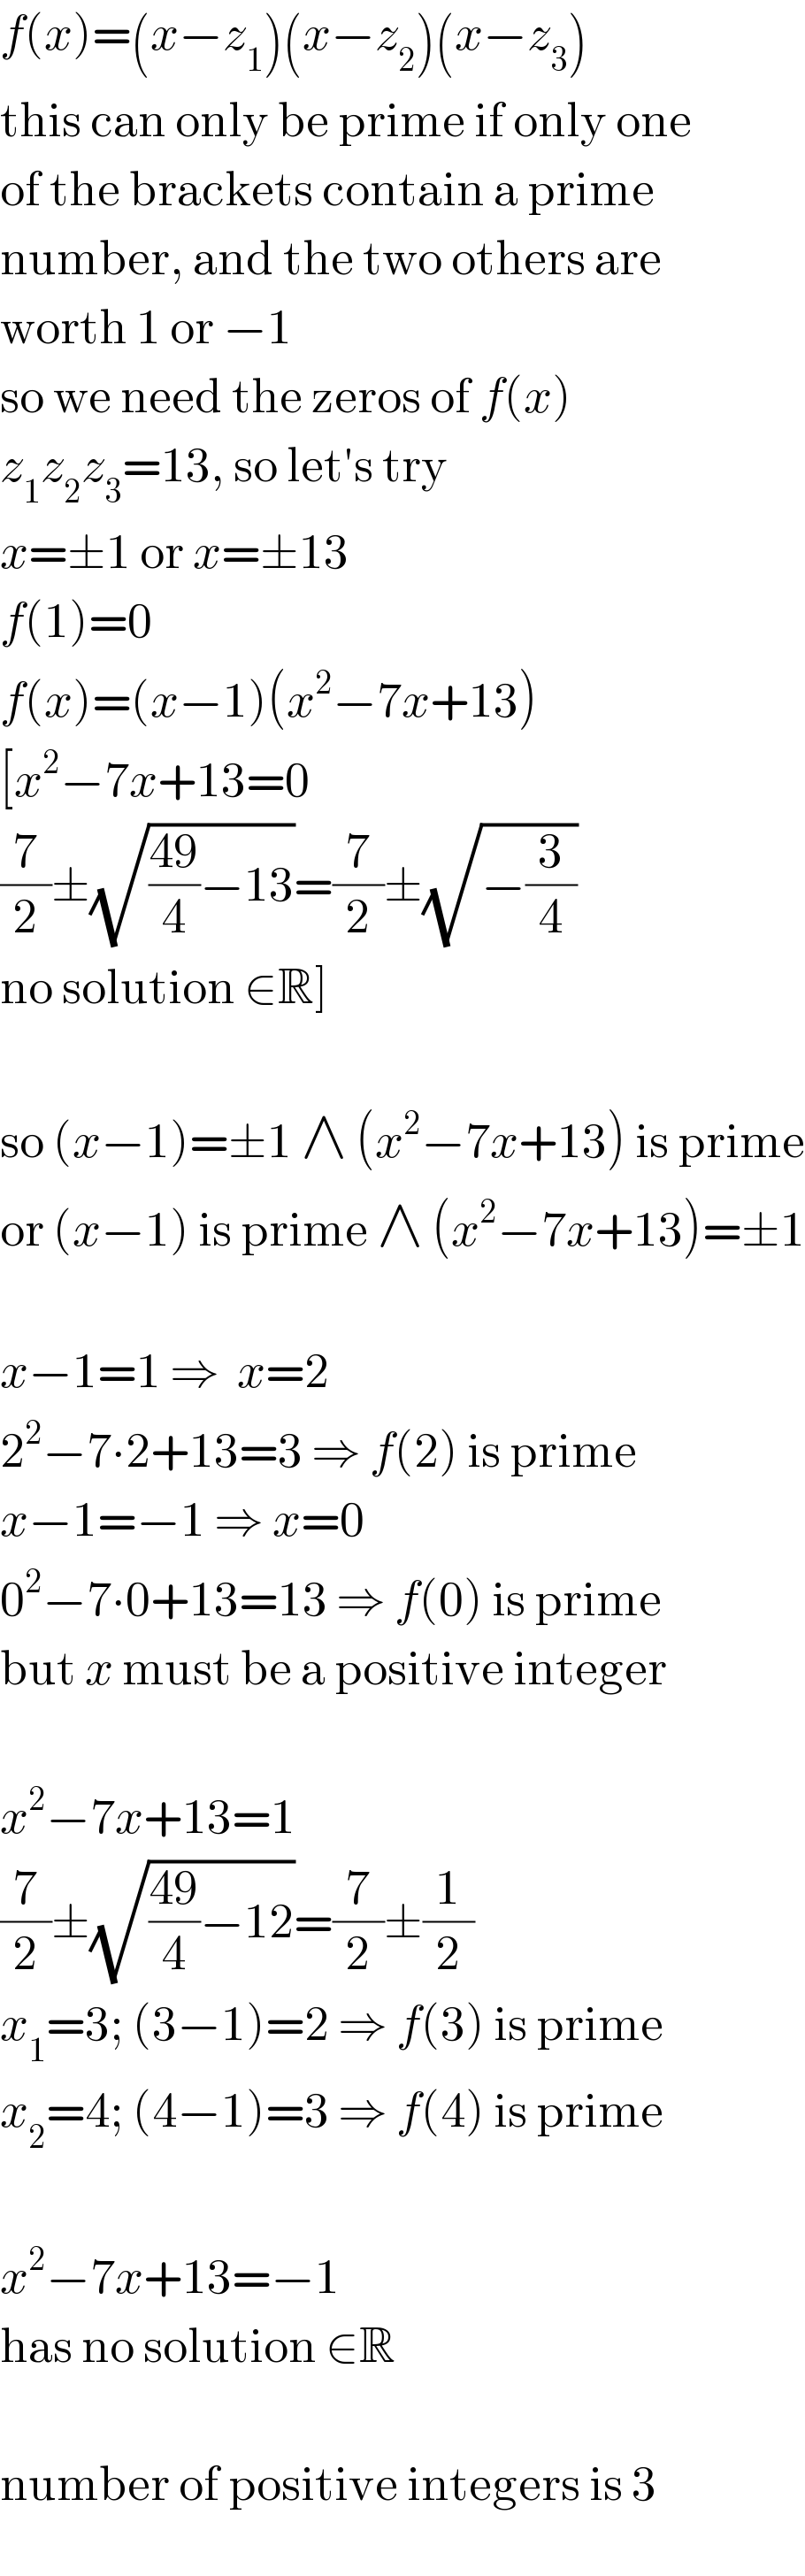 f(x)=(x−z_1 )(x−z_2 )(x−z_3 )  this can only be prime if only one  of the brackets contain a prime  number, and the two others are  worth 1 or −1  so we need the zeros of f(x)  z_1 z_2 z_3 =13, so let′s try  x=±1 or x=±13  f(1)=0  f(x)=(x−1)(x^2 −7x+13)  [x^2 −7x+13=0  (7/2)±(√(((49)/4)−13))=(7/2)±(√(−(3/4)))  no solution ∈R]    so (x−1)=±1 ∧ (x^2 −7x+13) is prime  or (x−1) is prime ∧ (x^2 −7x+13)=±1    x−1=1 ⇒  x=2  2^2 −7∙2+13=3 ⇒ f(2) is prime  x−1=−1 ⇒ x=0  0^2 −7∙0+13=13 ⇒ f(0) is prime  but x must be a positive integer    x^2 −7x+13=1  (7/2)±(√(((49)/4)−12))=(7/2)±(1/2)  x_1 =3; (3−1)=2 ⇒ f(3) is prime  x_2 =4; (4−1)=3 ⇒ f(4) is prime    x^2 −7x+13=−1  has no solution ∈R    number of positive integers is 3  